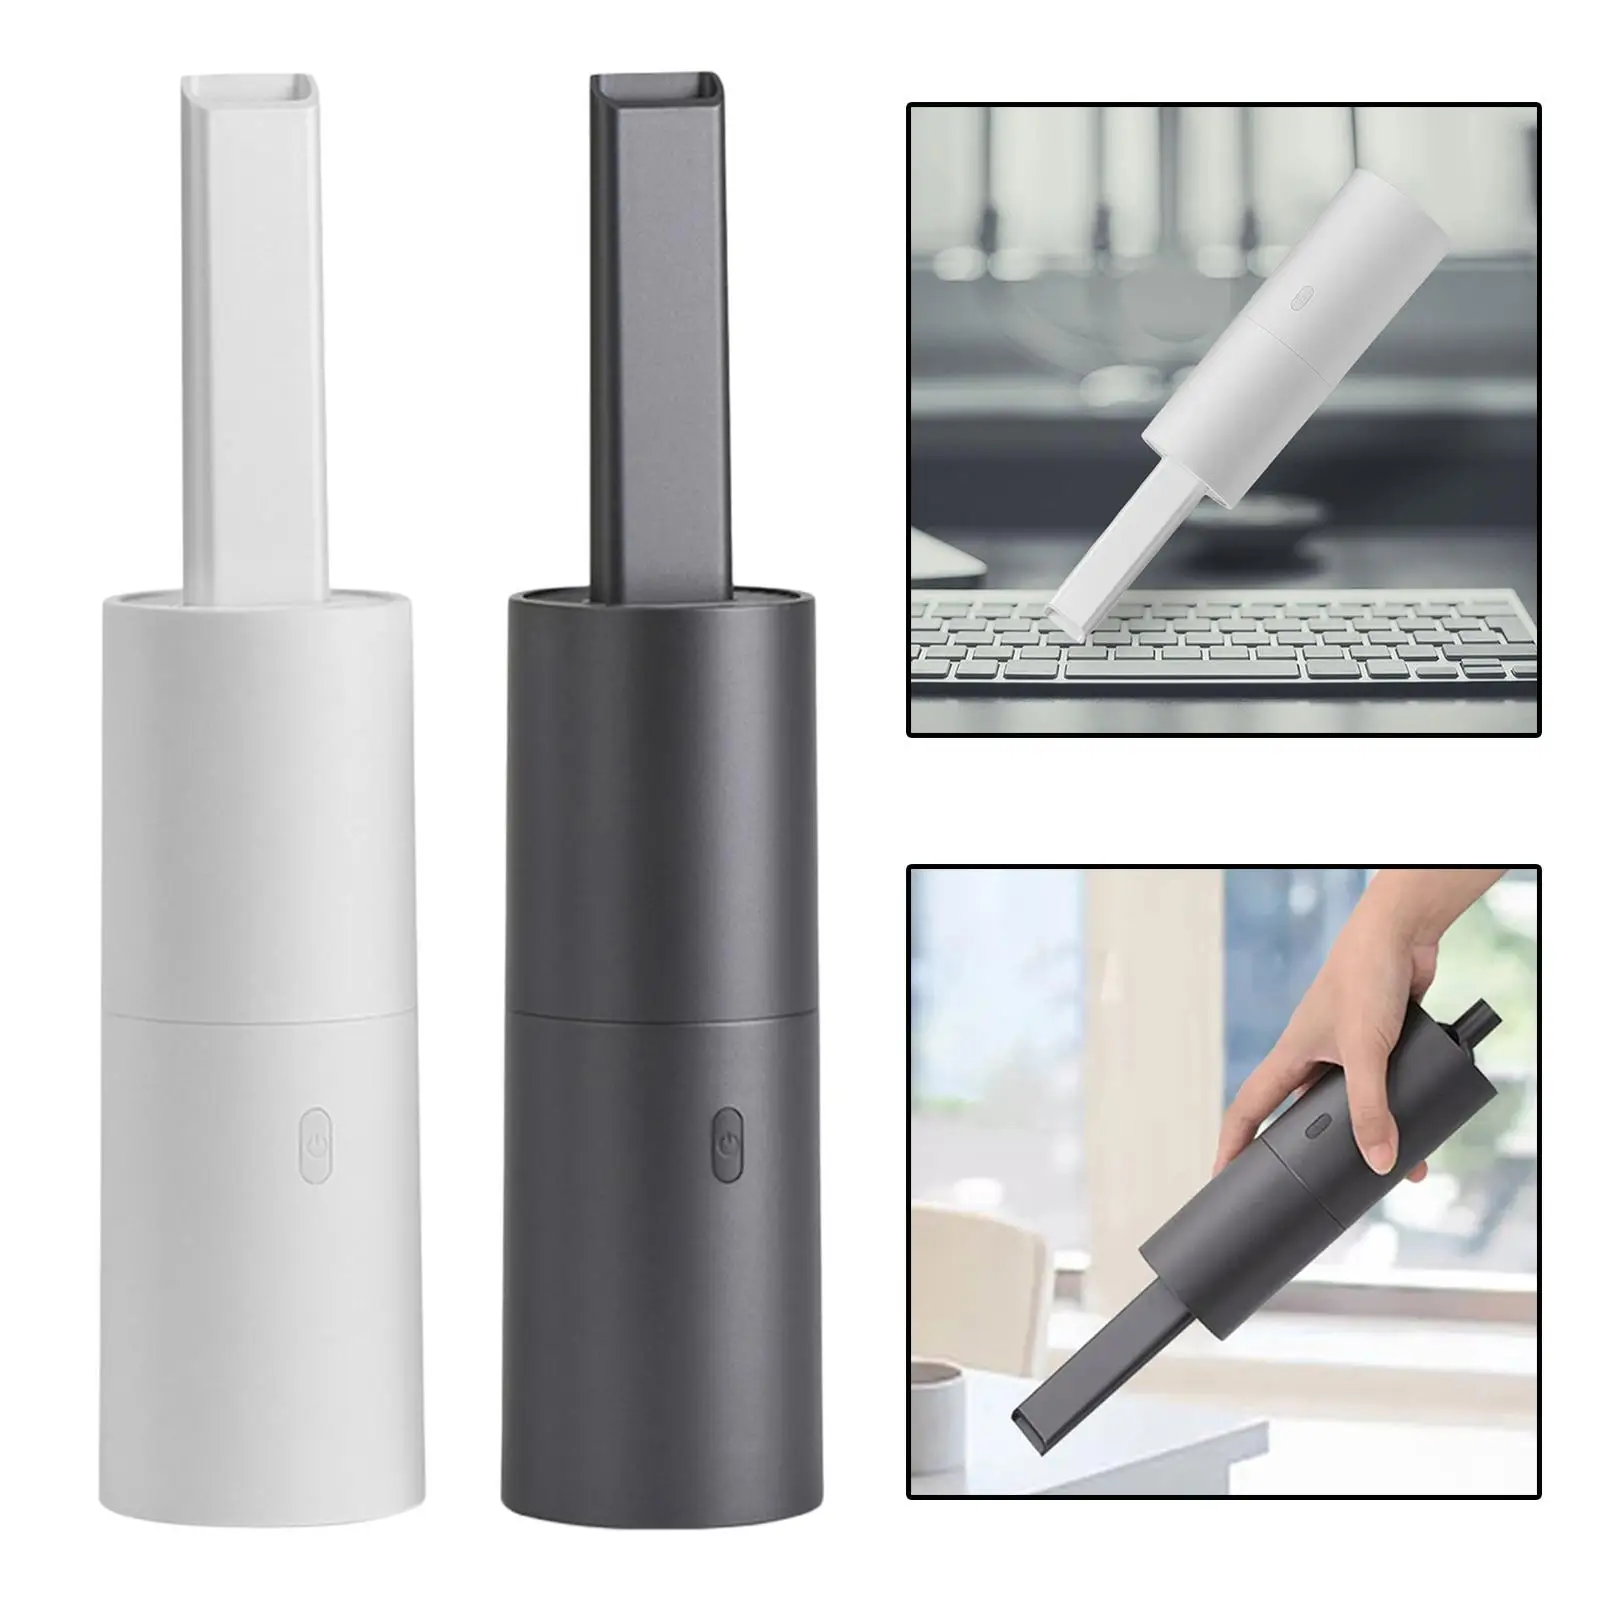 Vacuum Cleaner USB Rechargeable Fast-Charging, Car Vacuum, for Keyboard Office